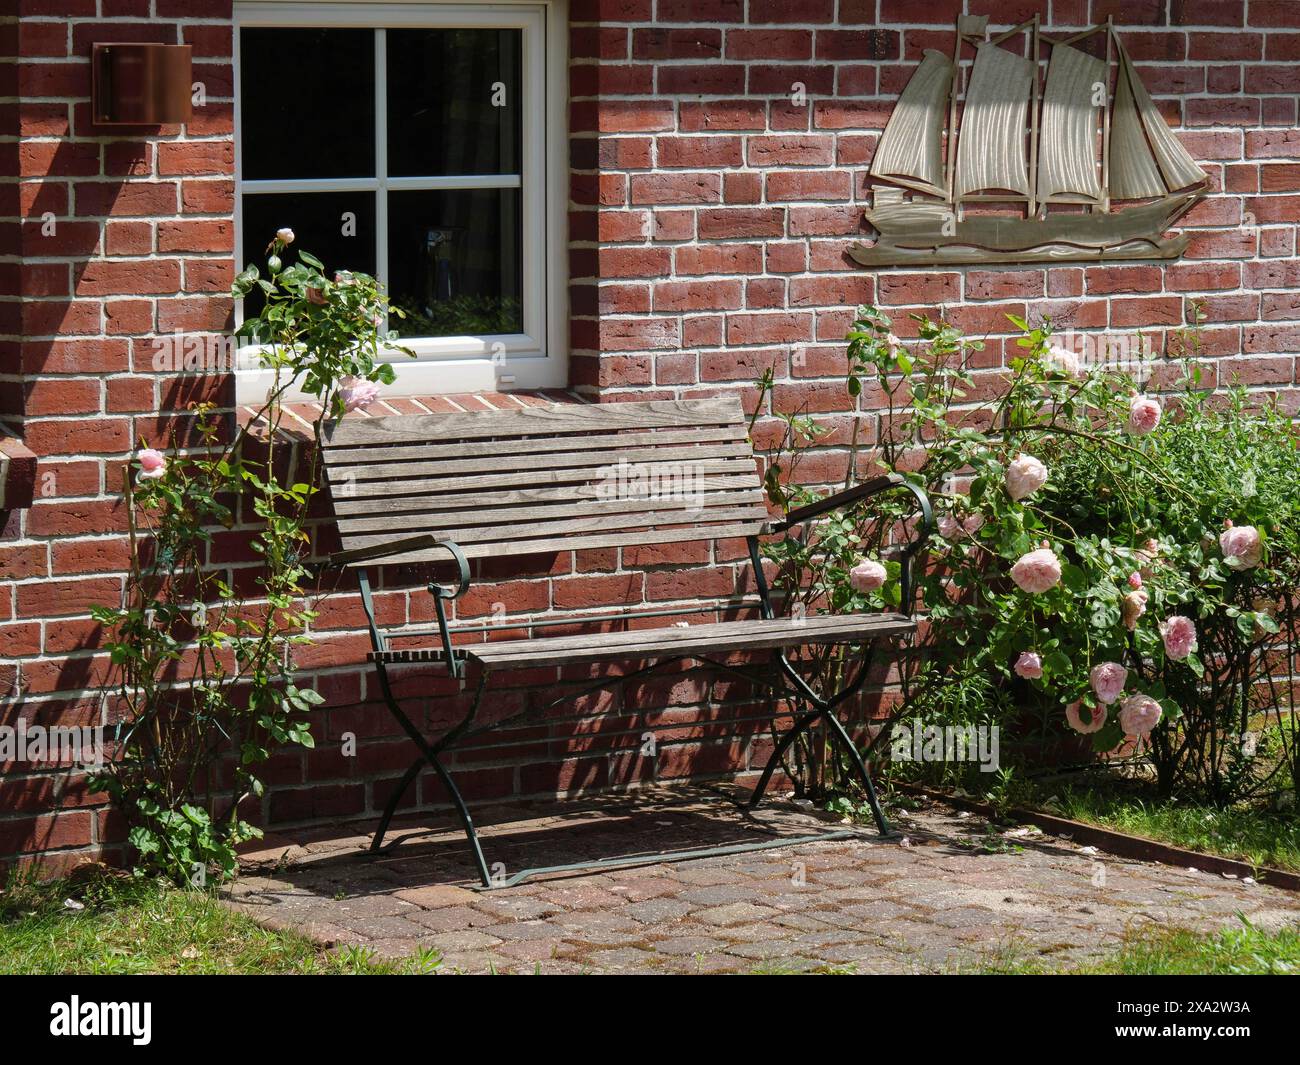 A wooden bench next to rose bushes in front of a red brick wall with a window, Baltrum Germany Stock Photo